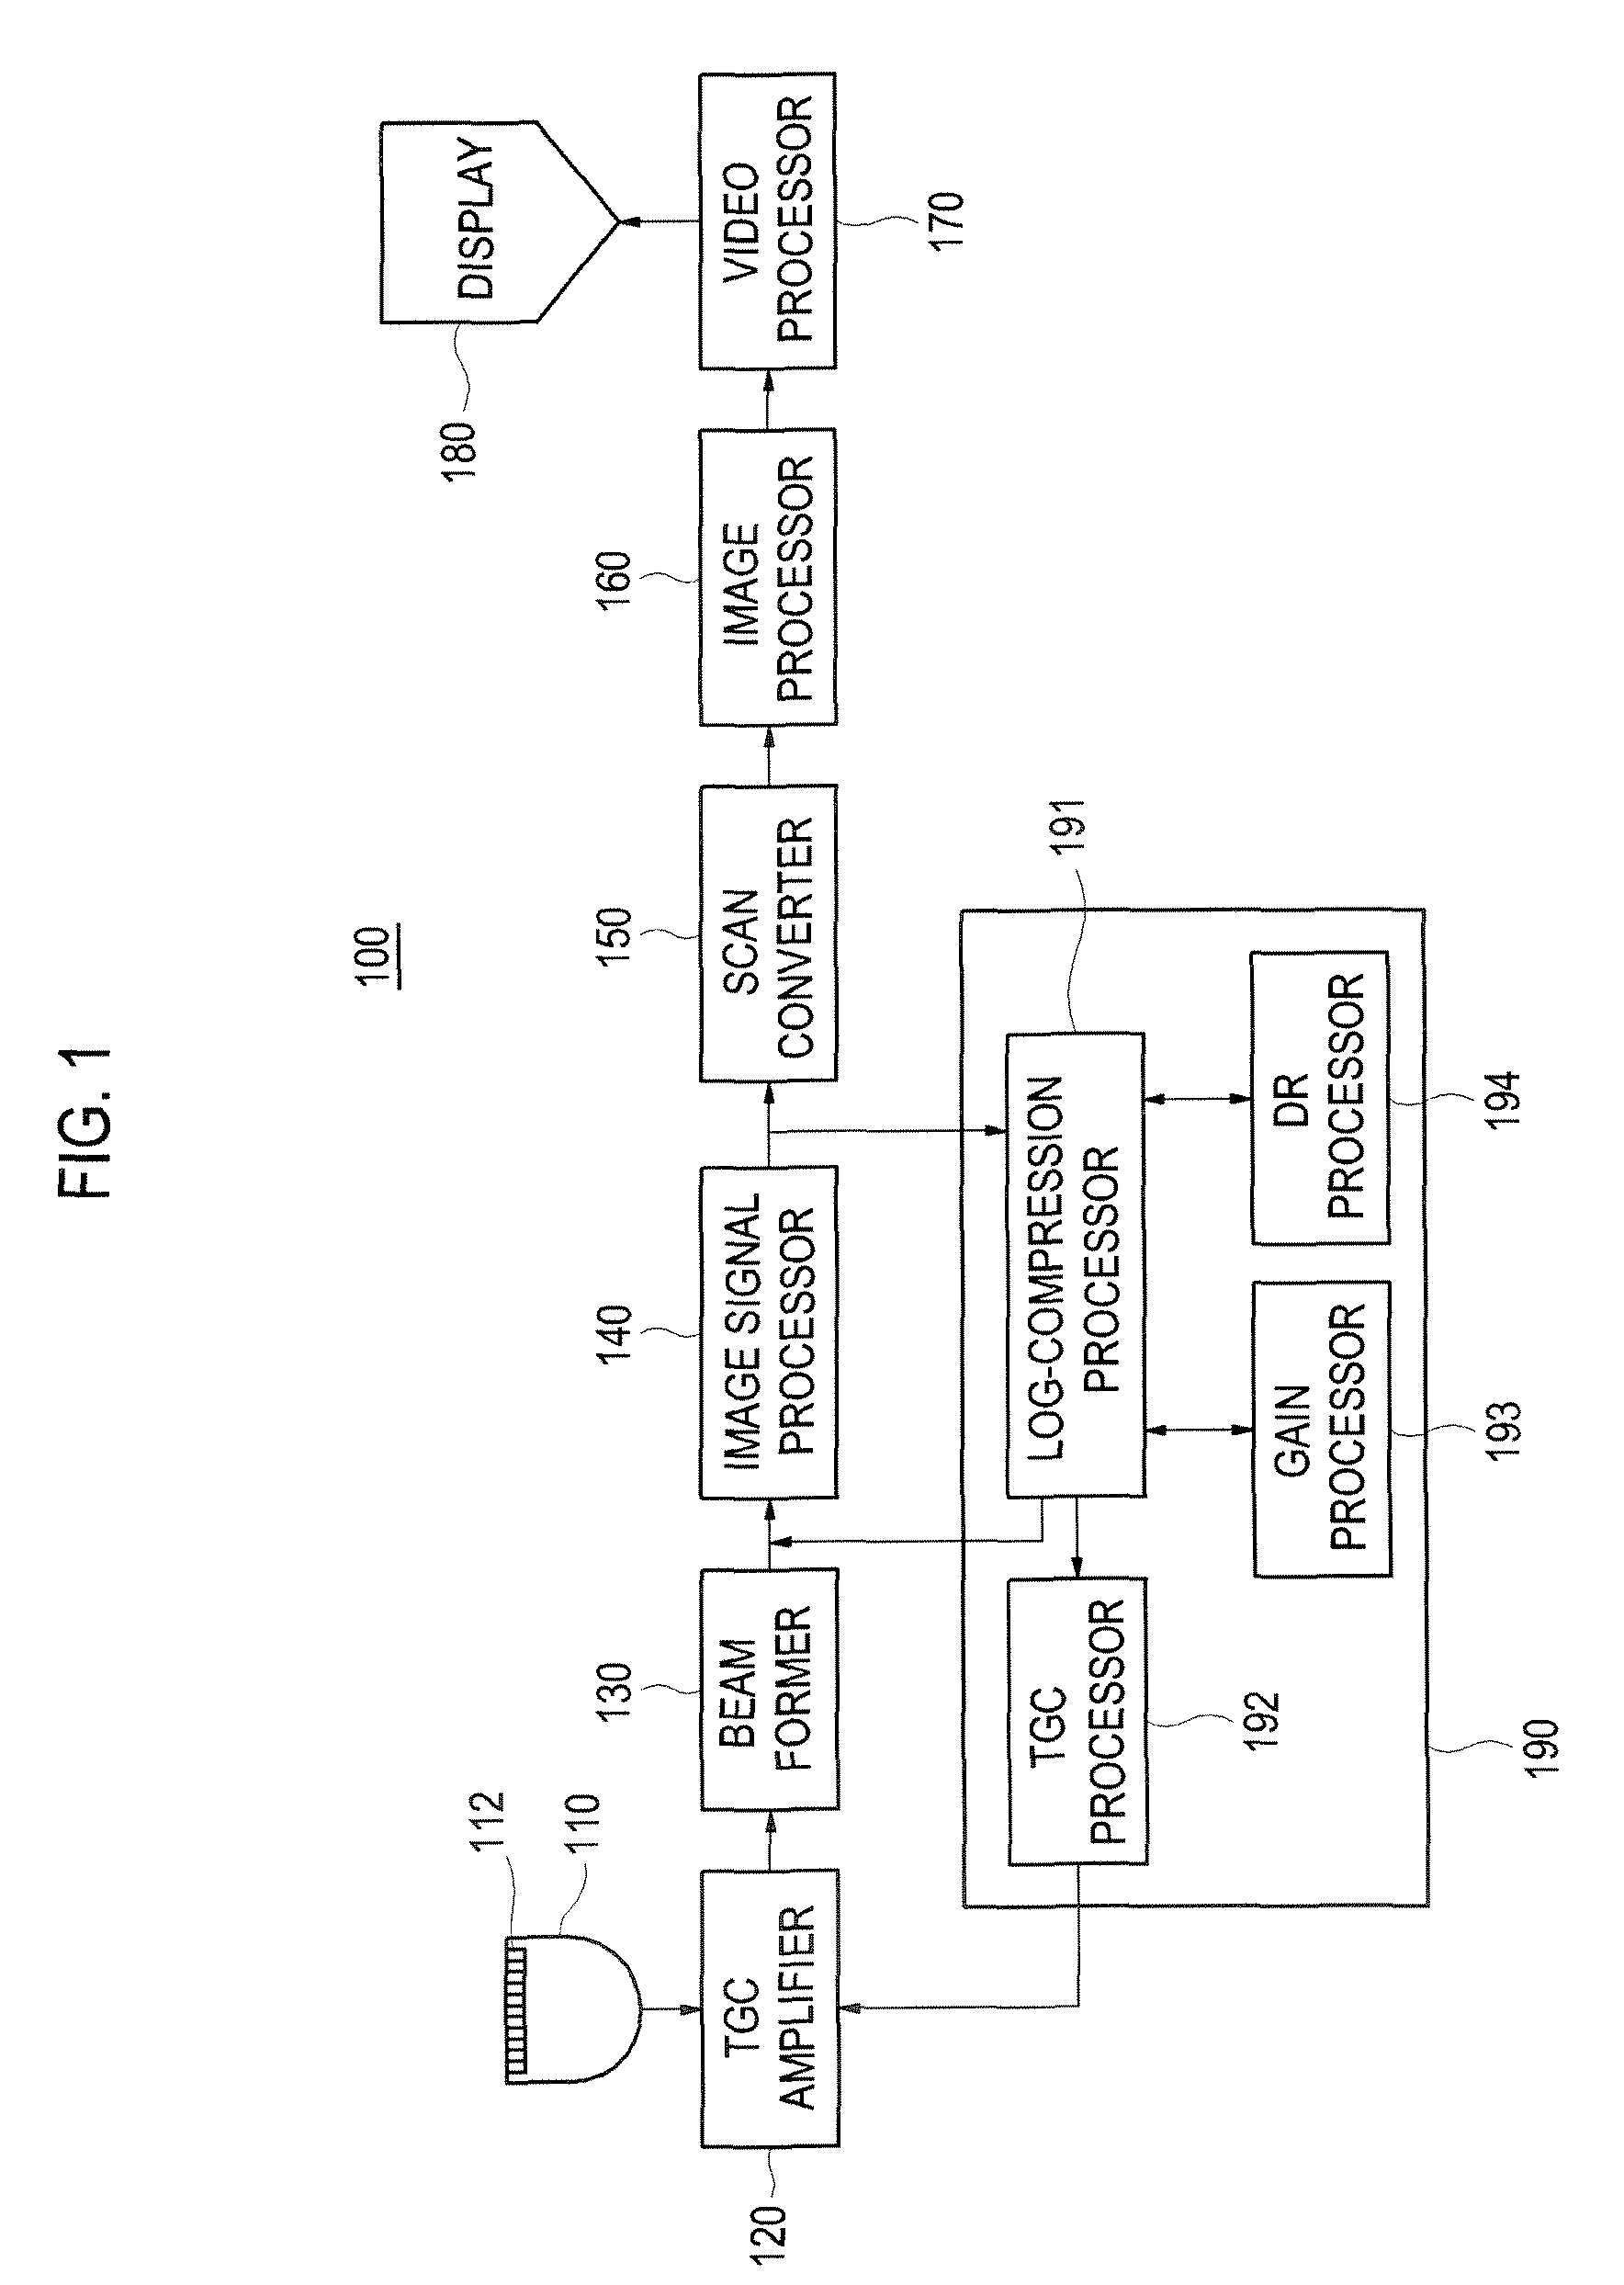 Image processing system and method of enhancing the quality of an ultrasound image